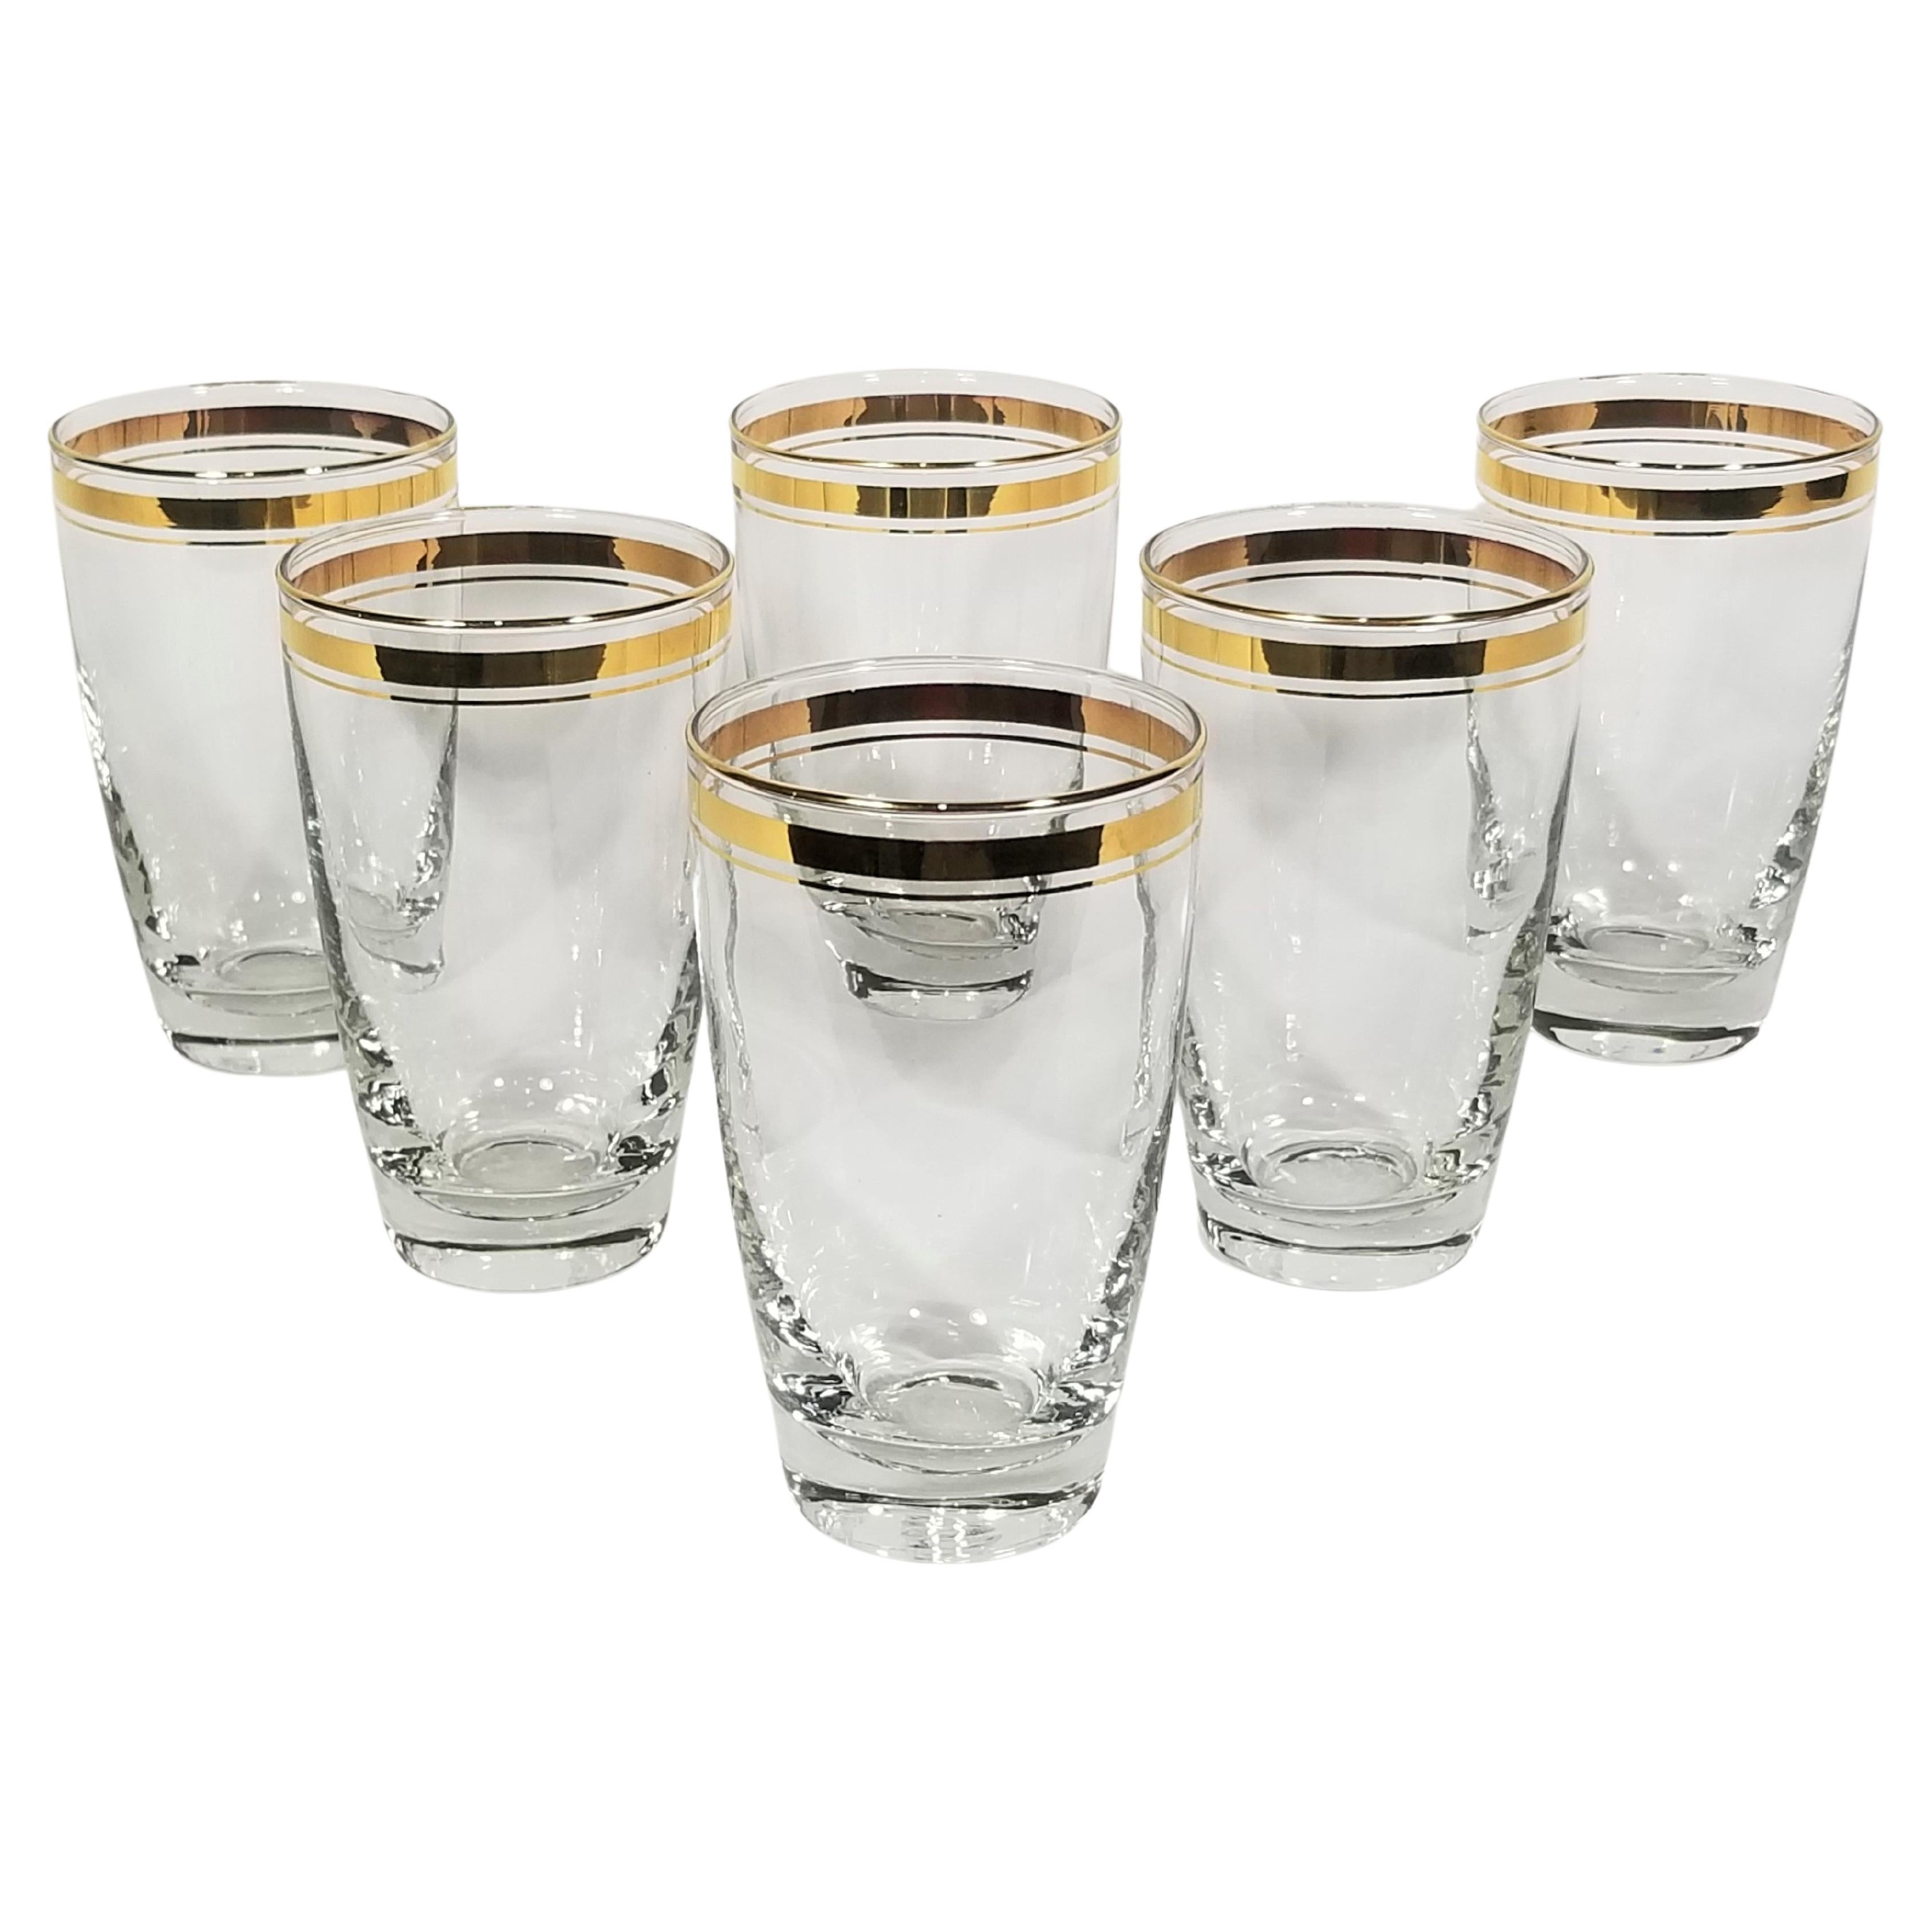 Libbey Mid-century Gold Rimmed Glassware Barware Set of 6 For Sale